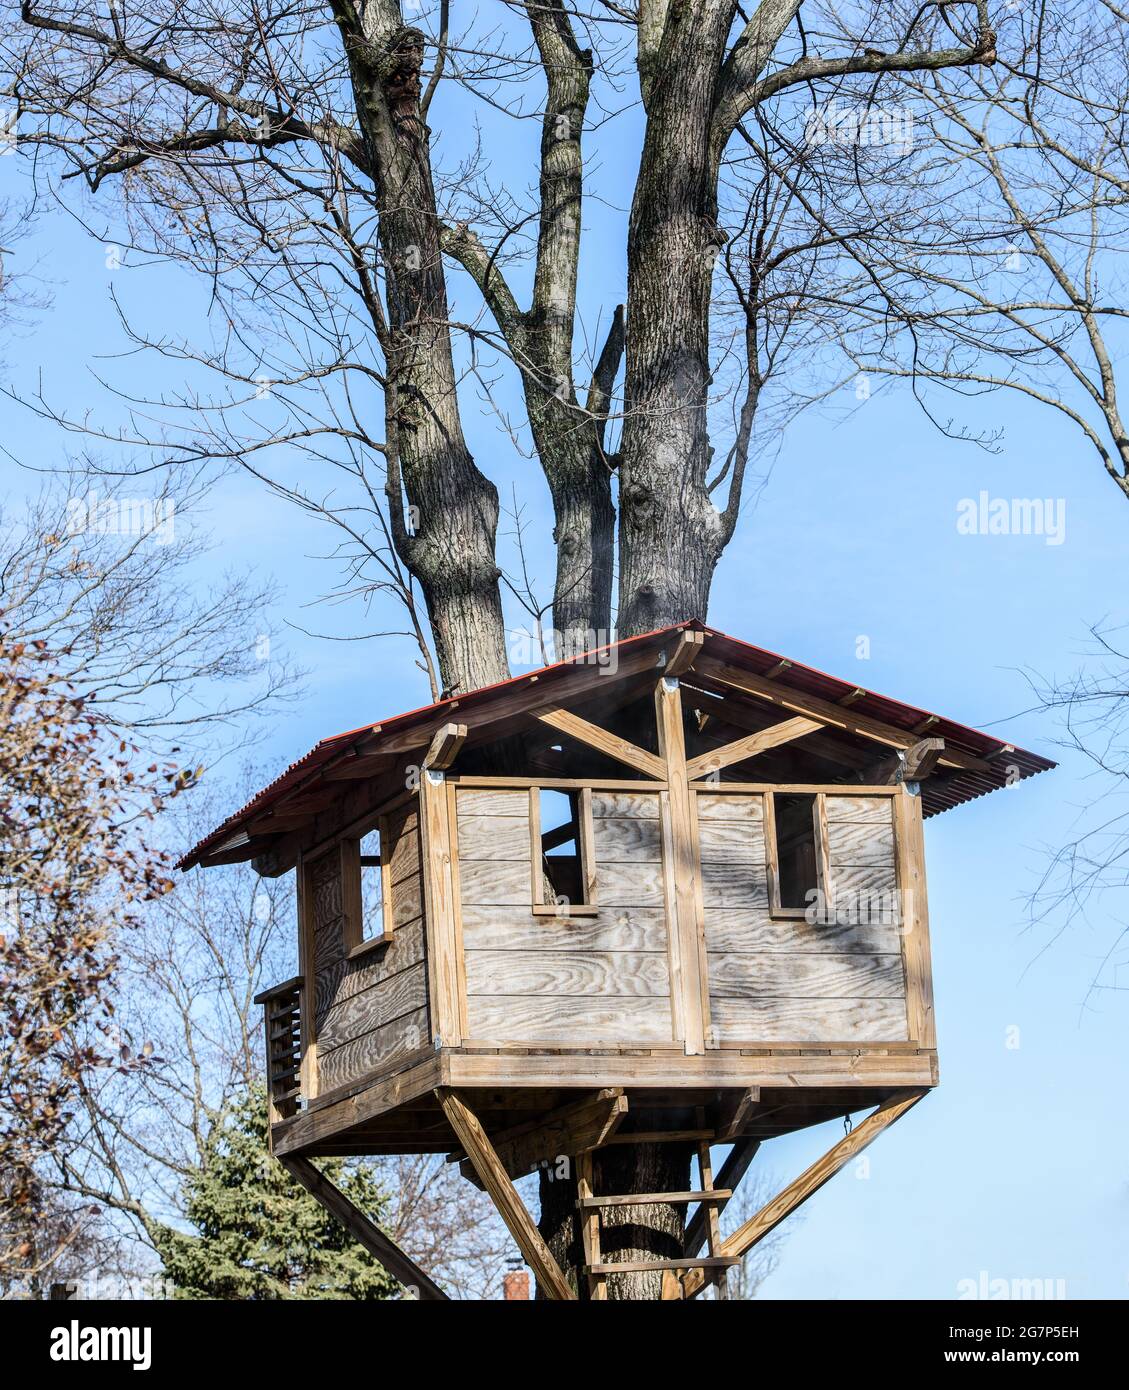 Large tree house made of wood attached high up on a tree. Stock Photo